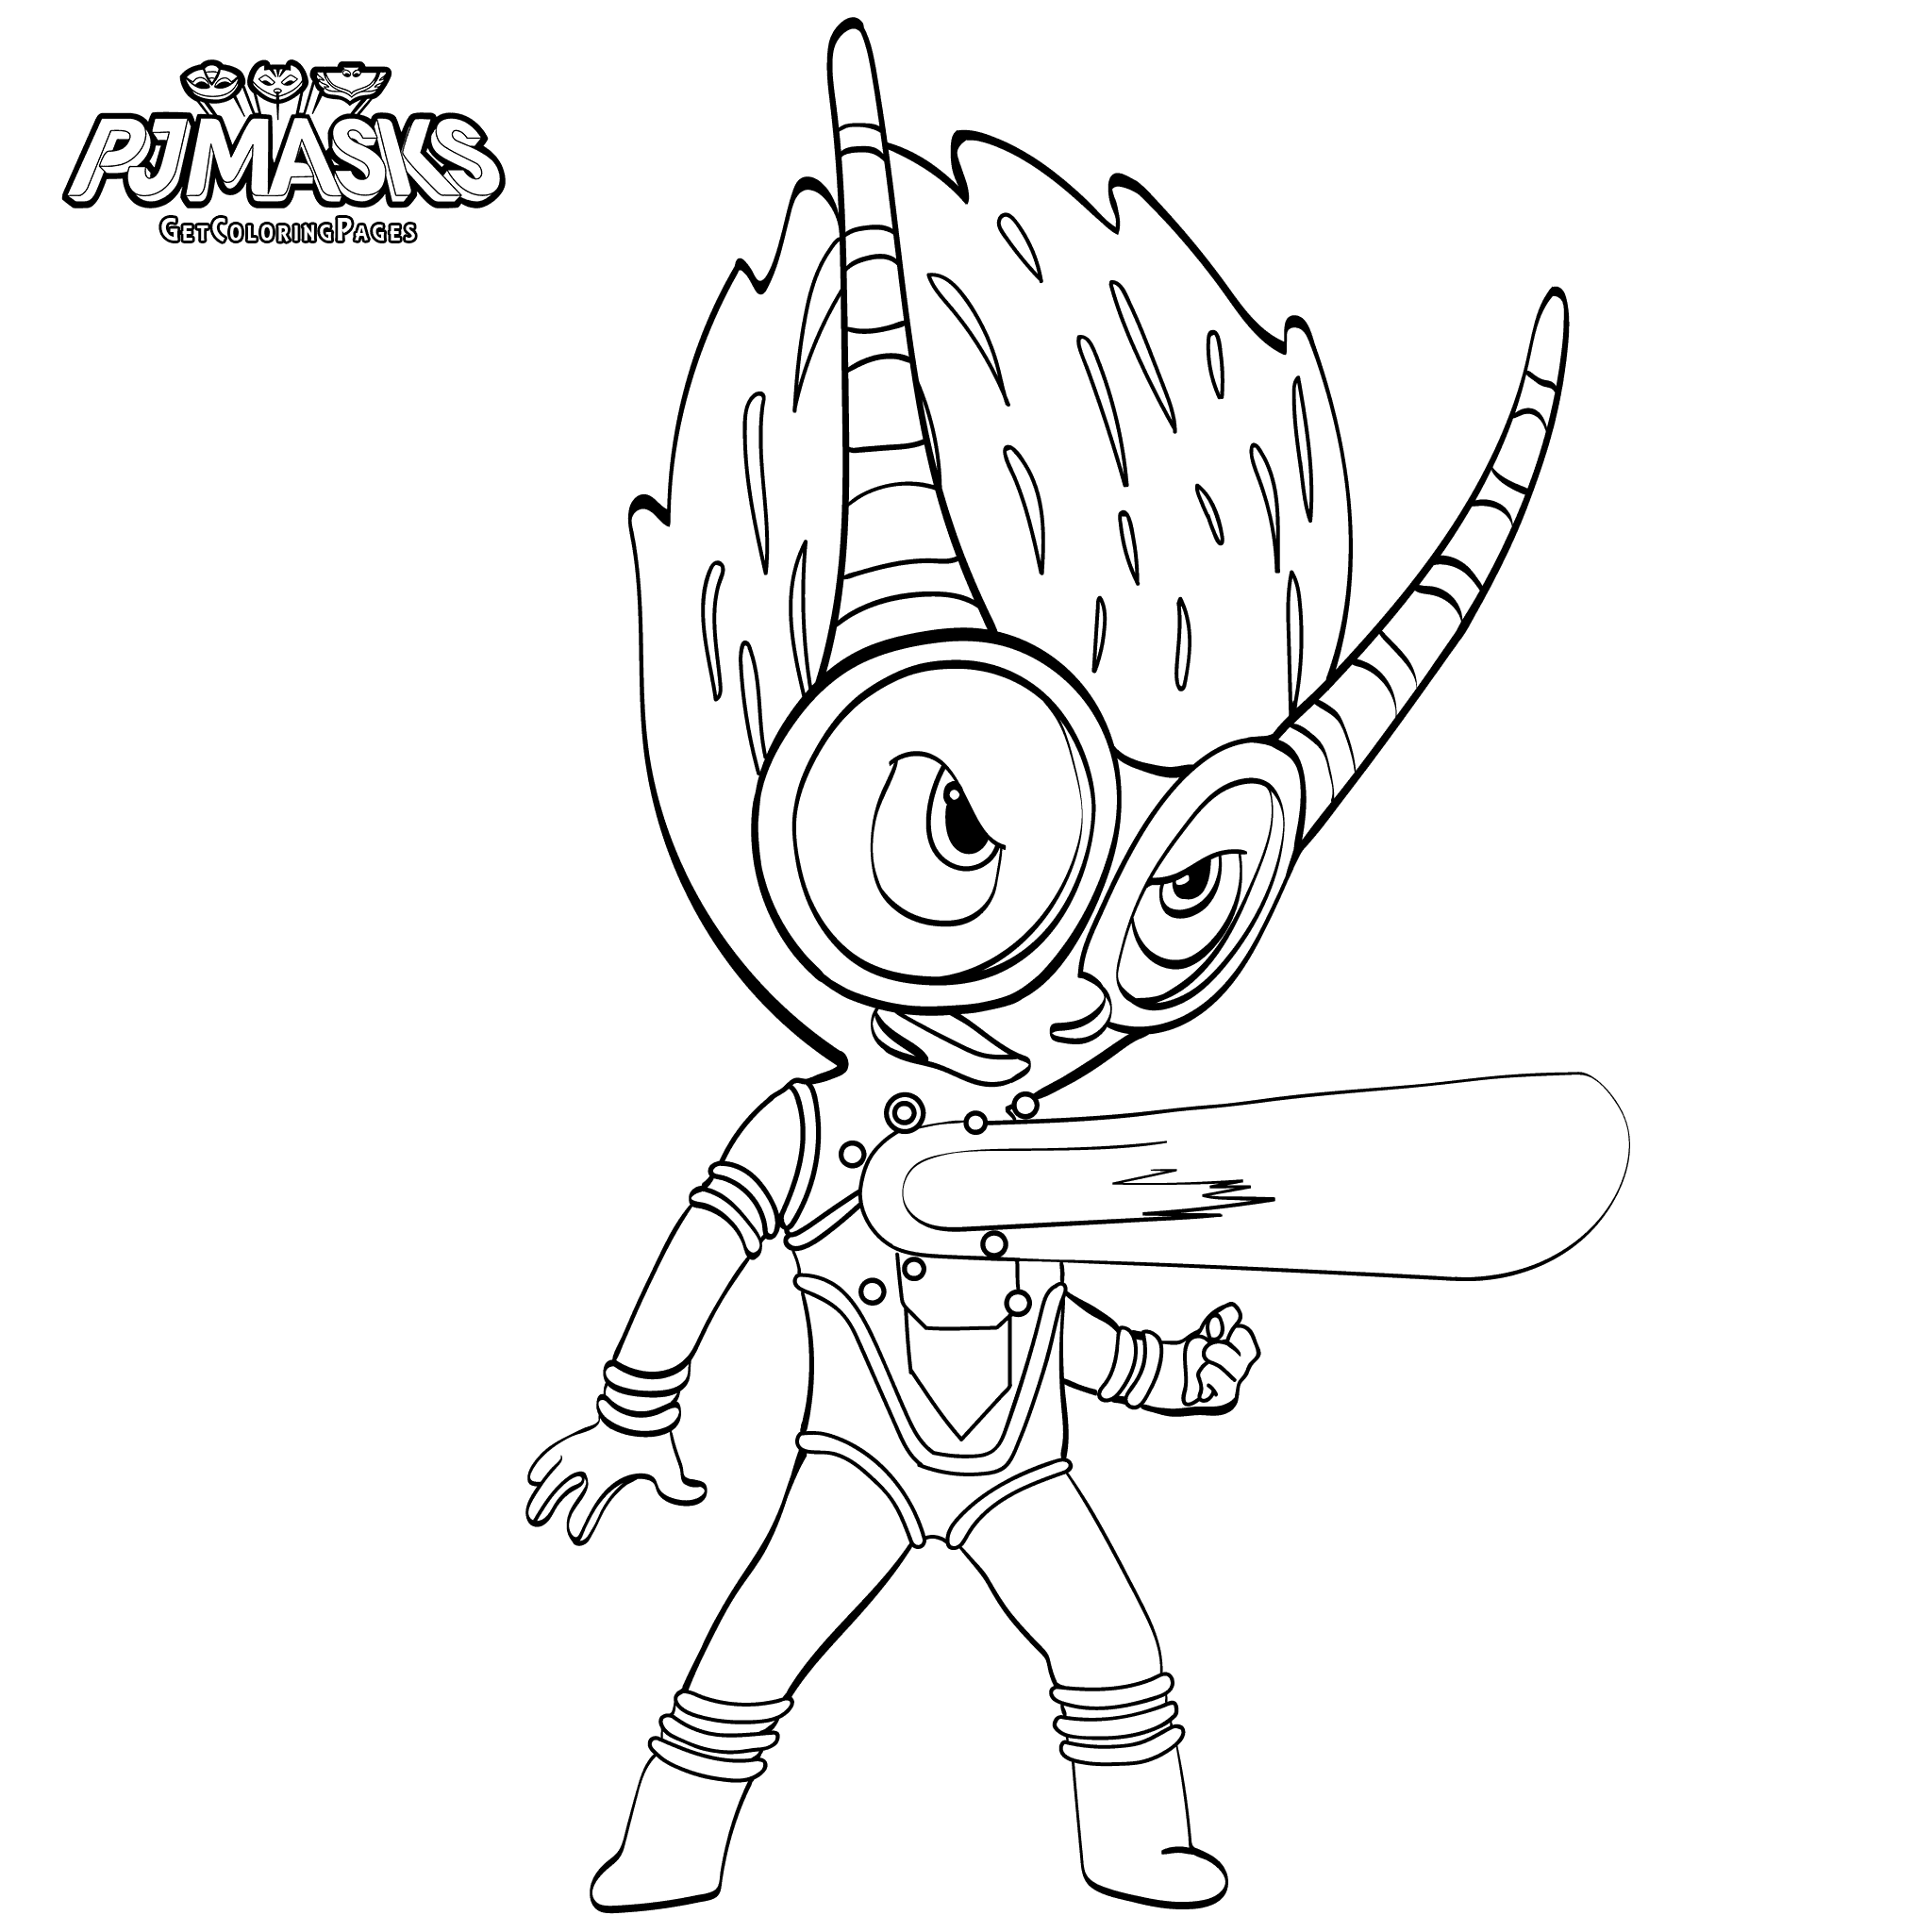 PJ Masks Coloring Pages   Coloring Cool